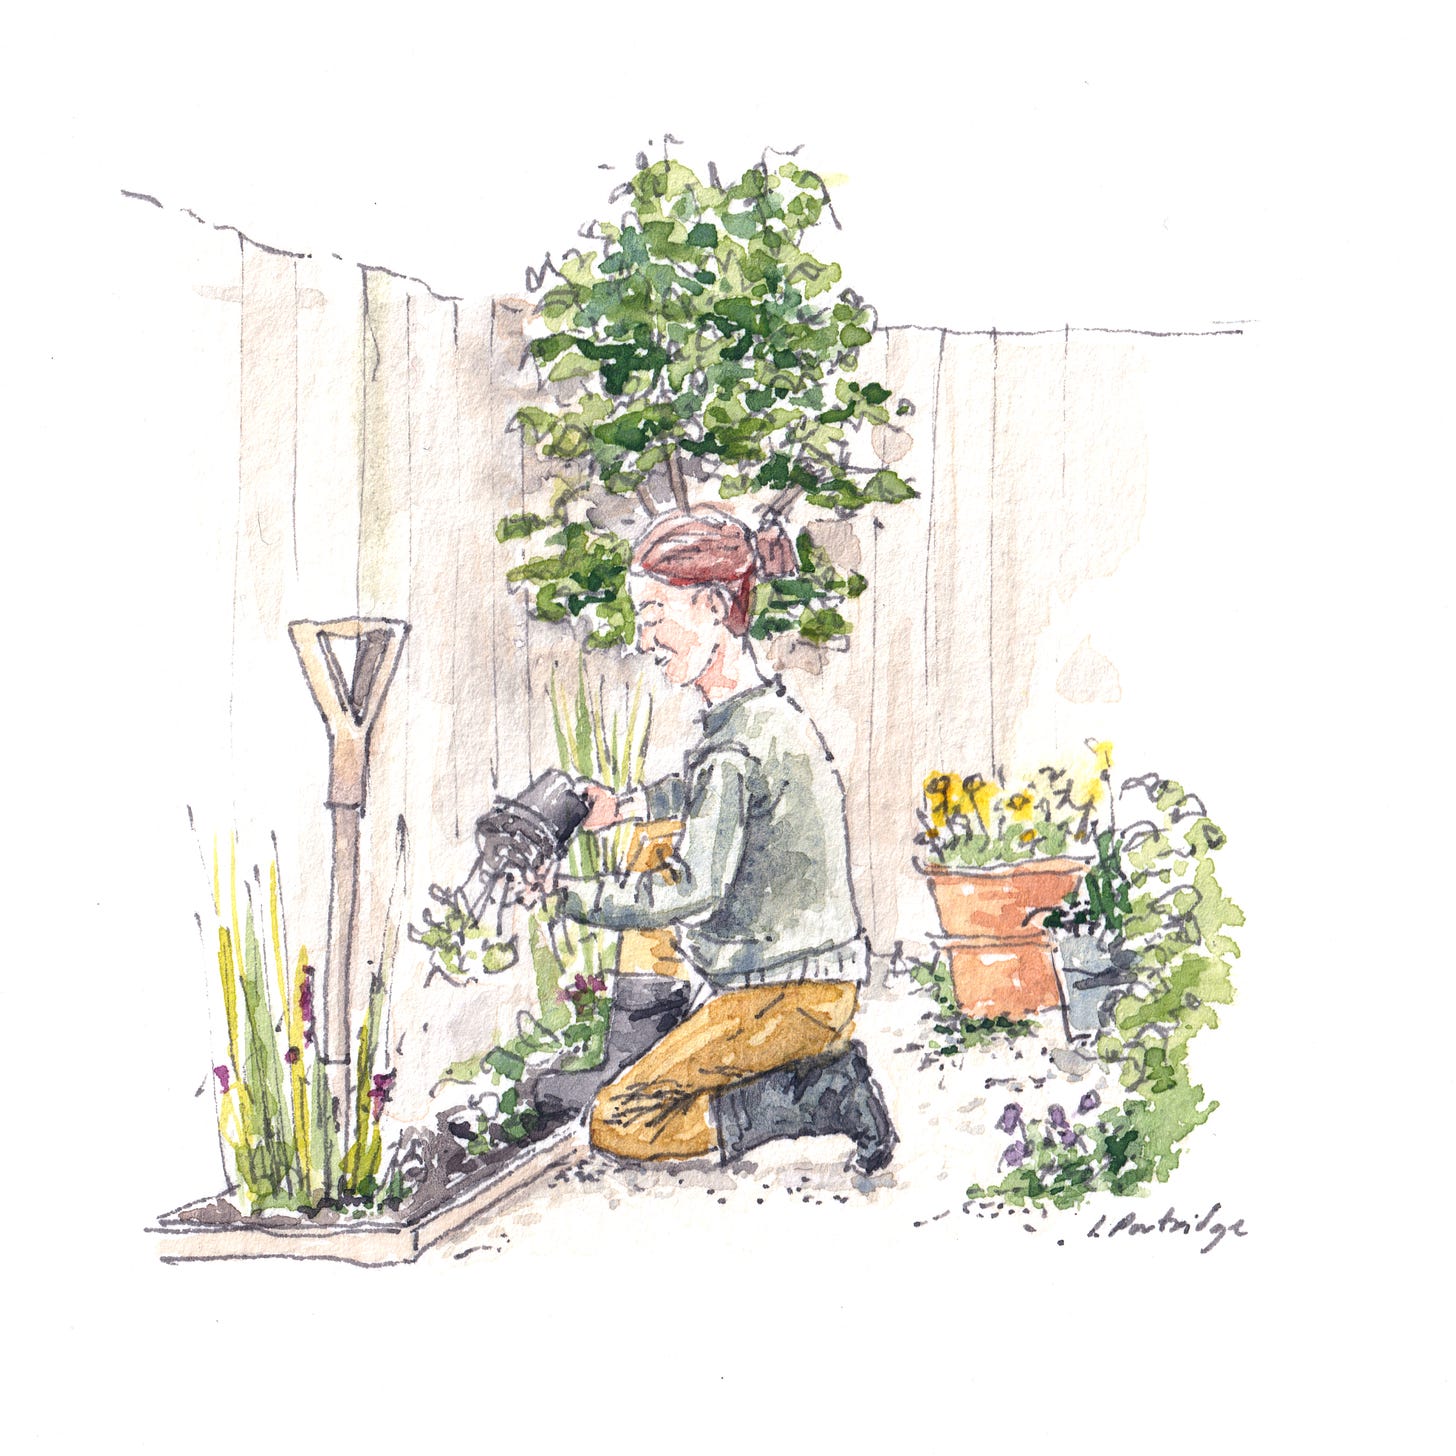 watercolour painting of a woman kneeling in her garden planting flowers. There's a garden fork and flowerpots nearby